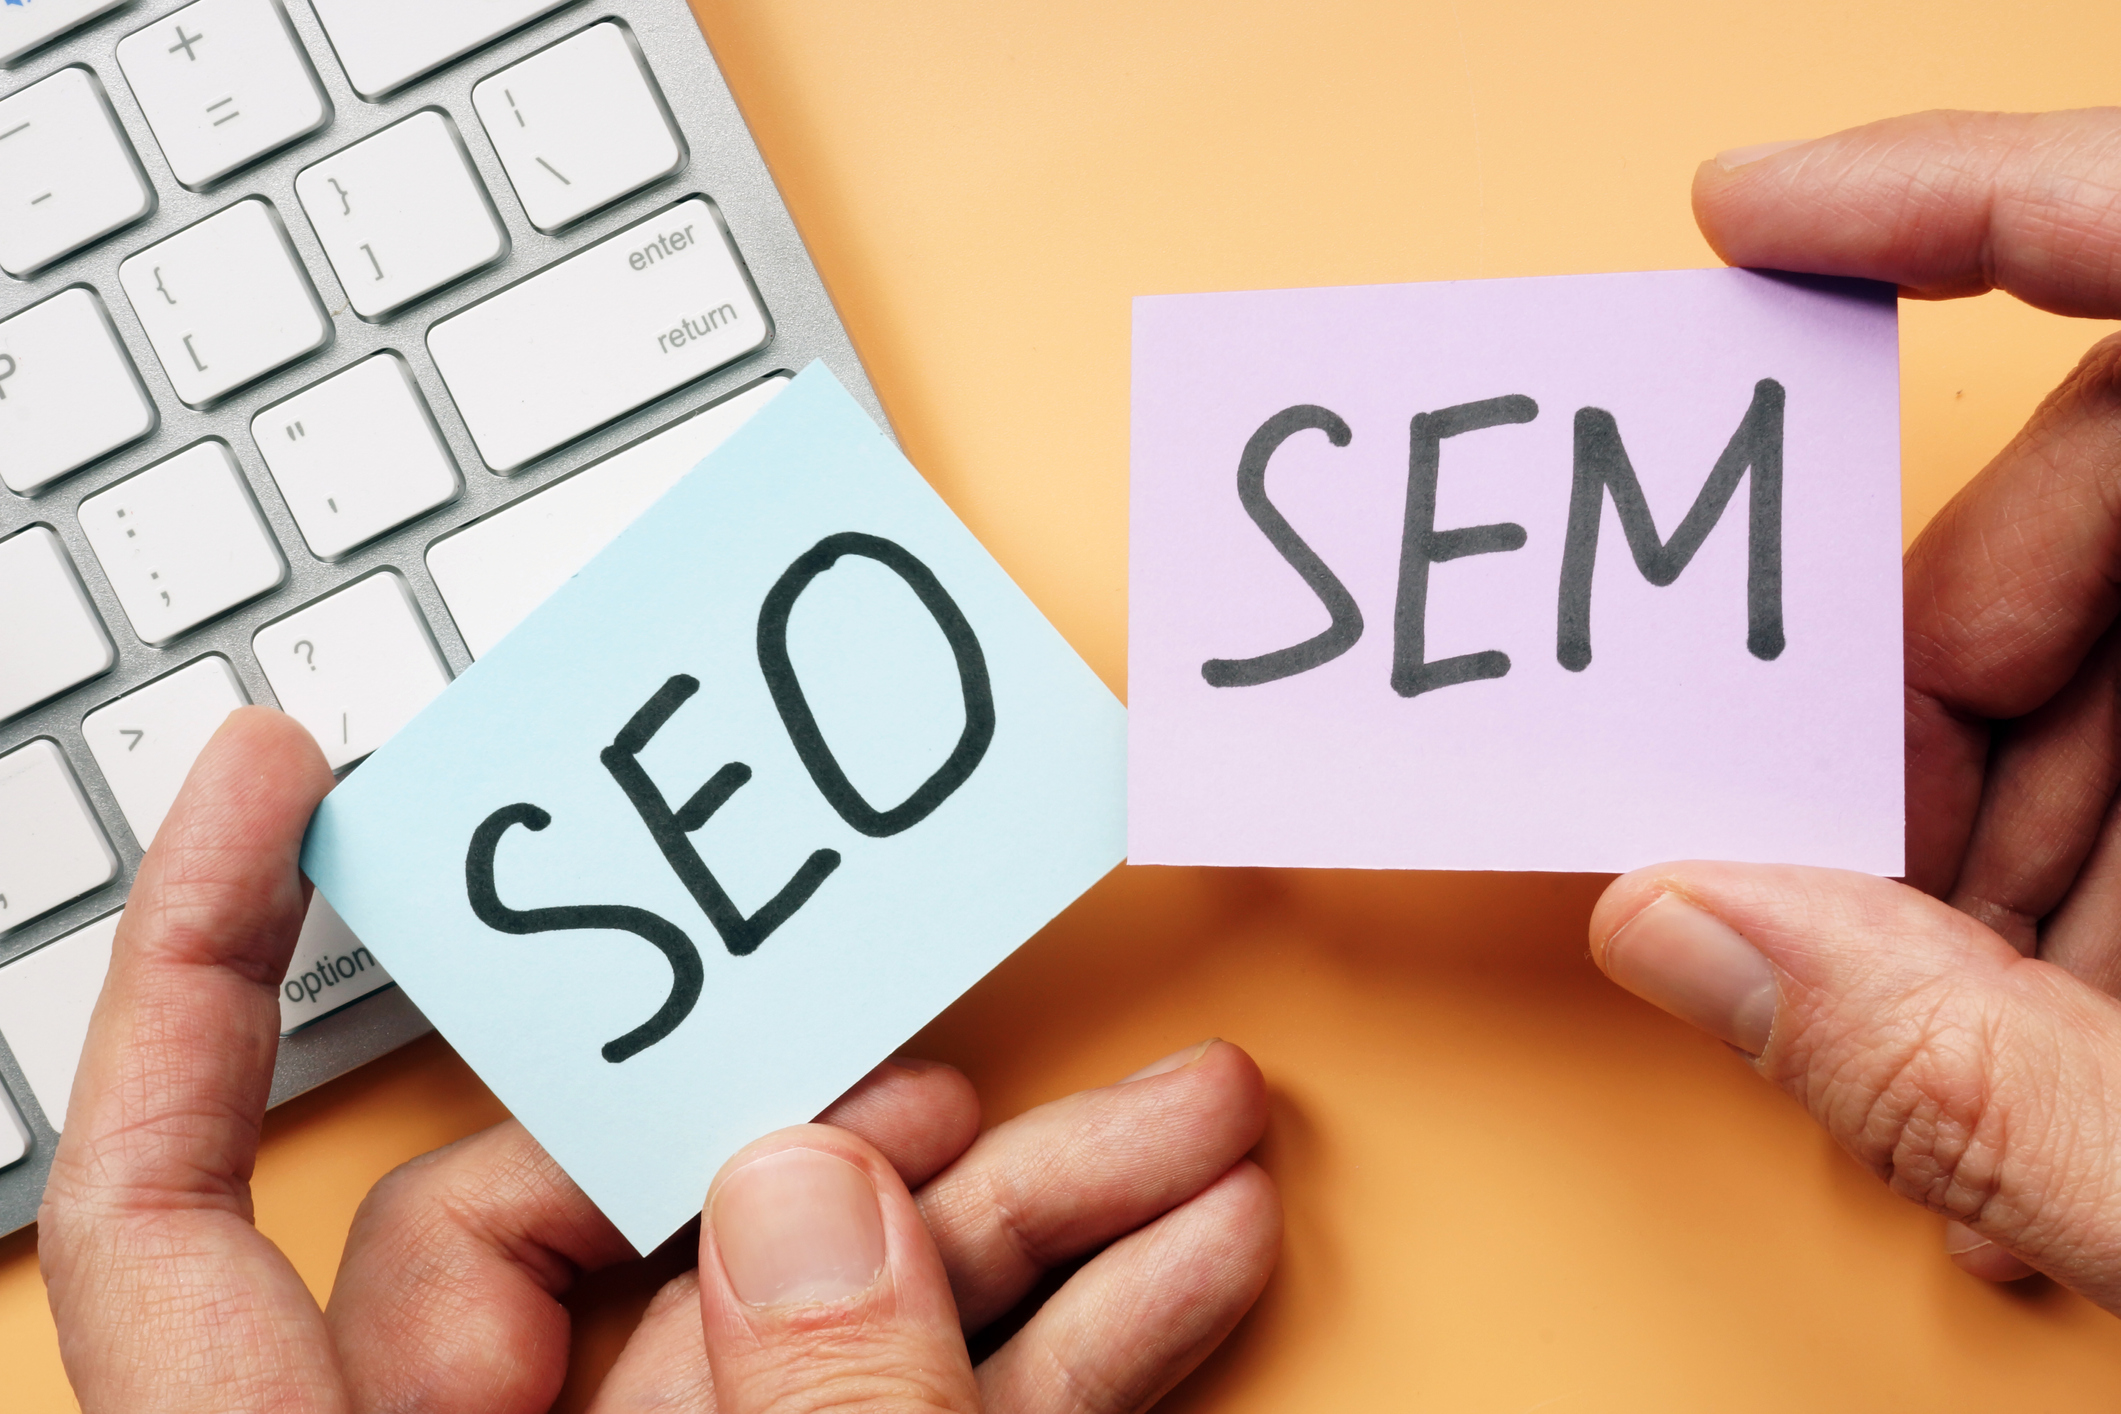 SEO Vs SEM: What Are the Differences?